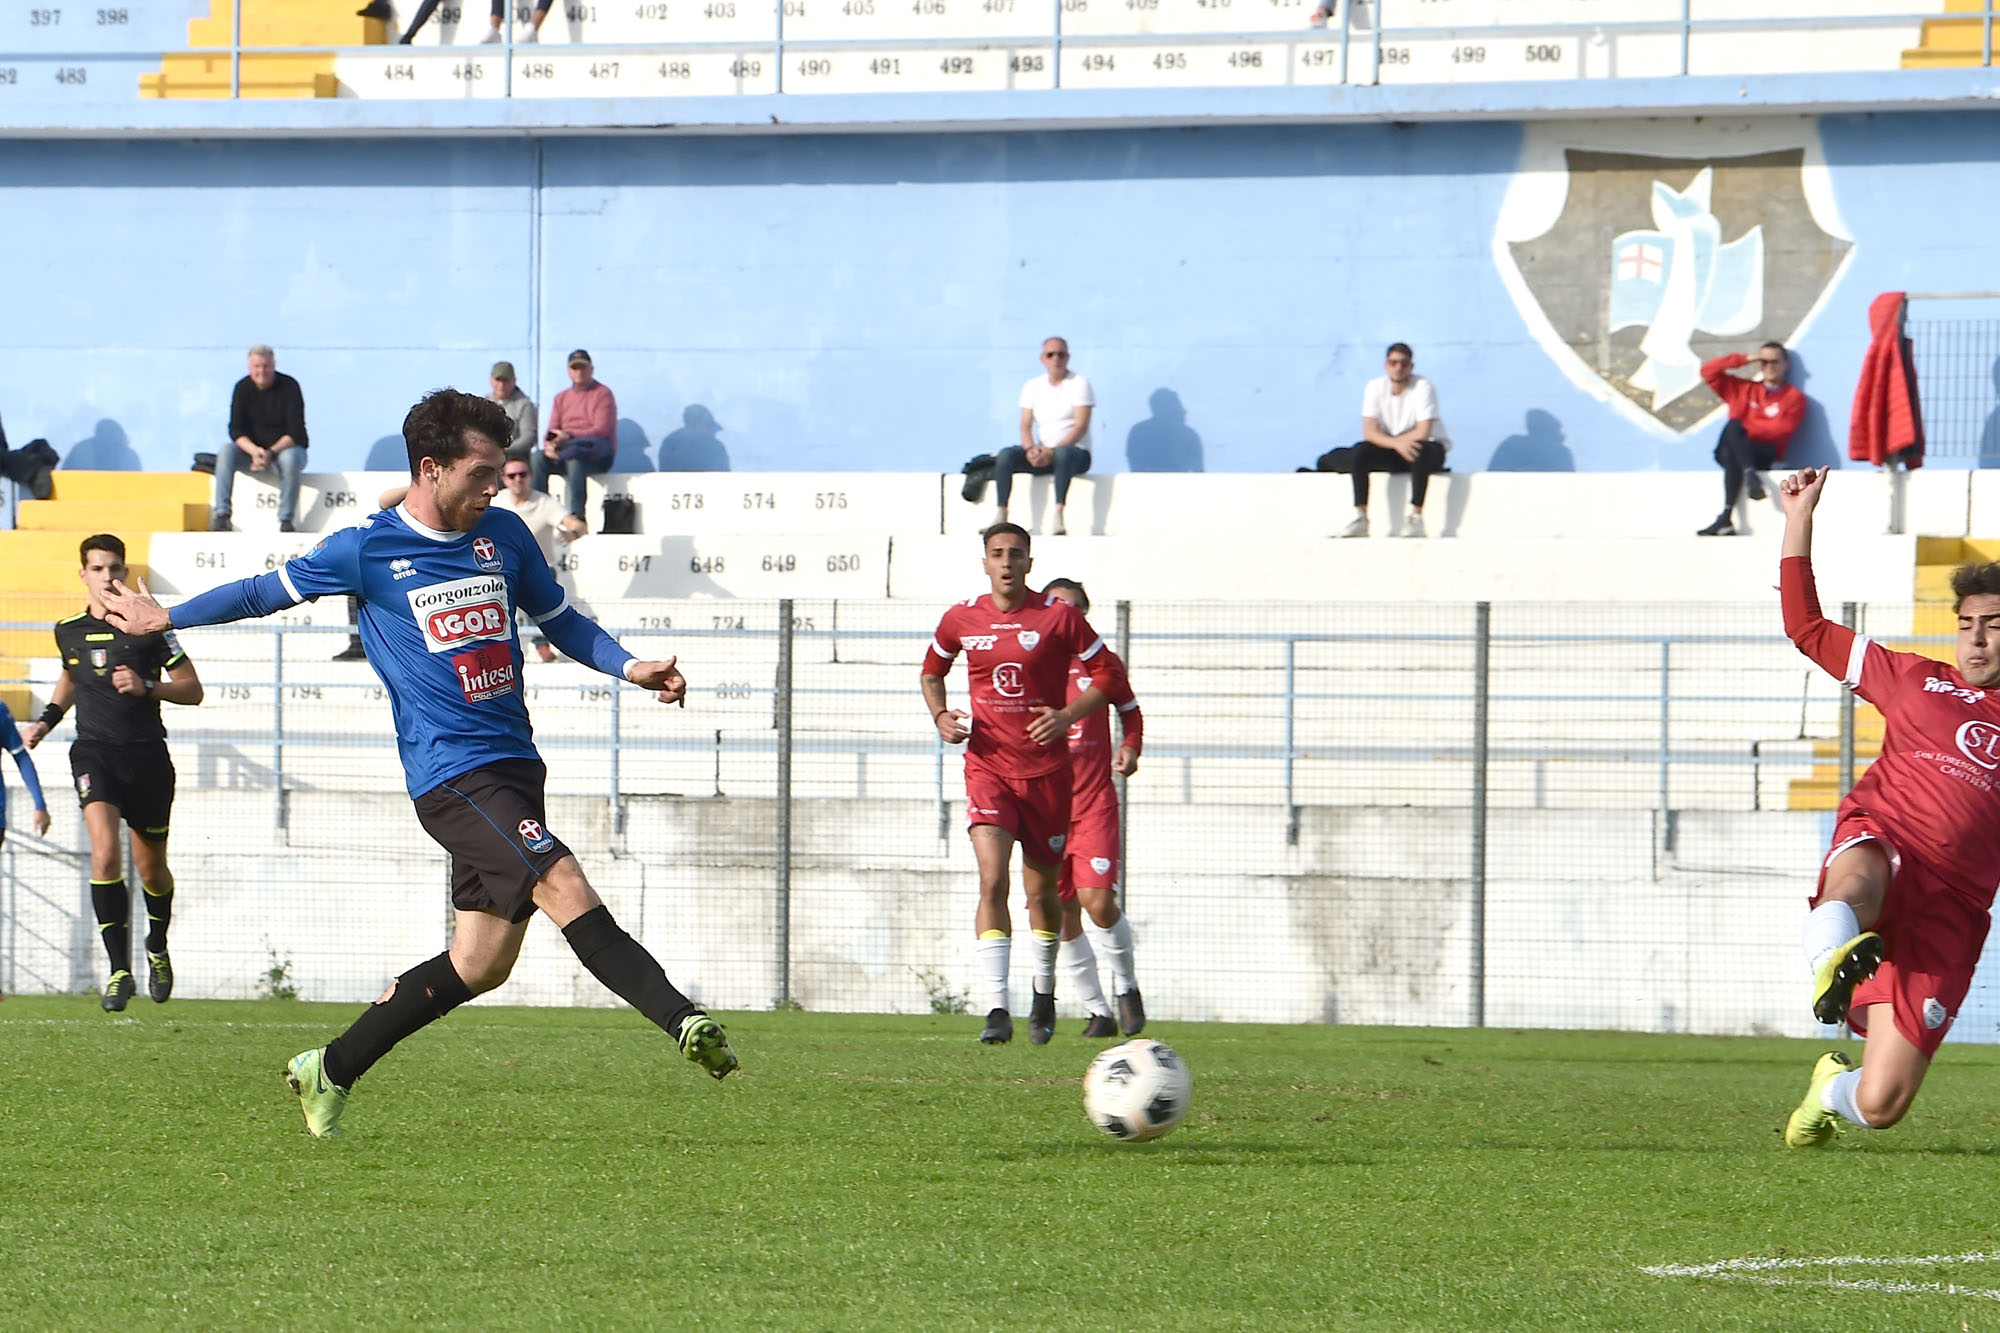 Read more about the article Sanremese-Novara 3-2 | Tabellino del match